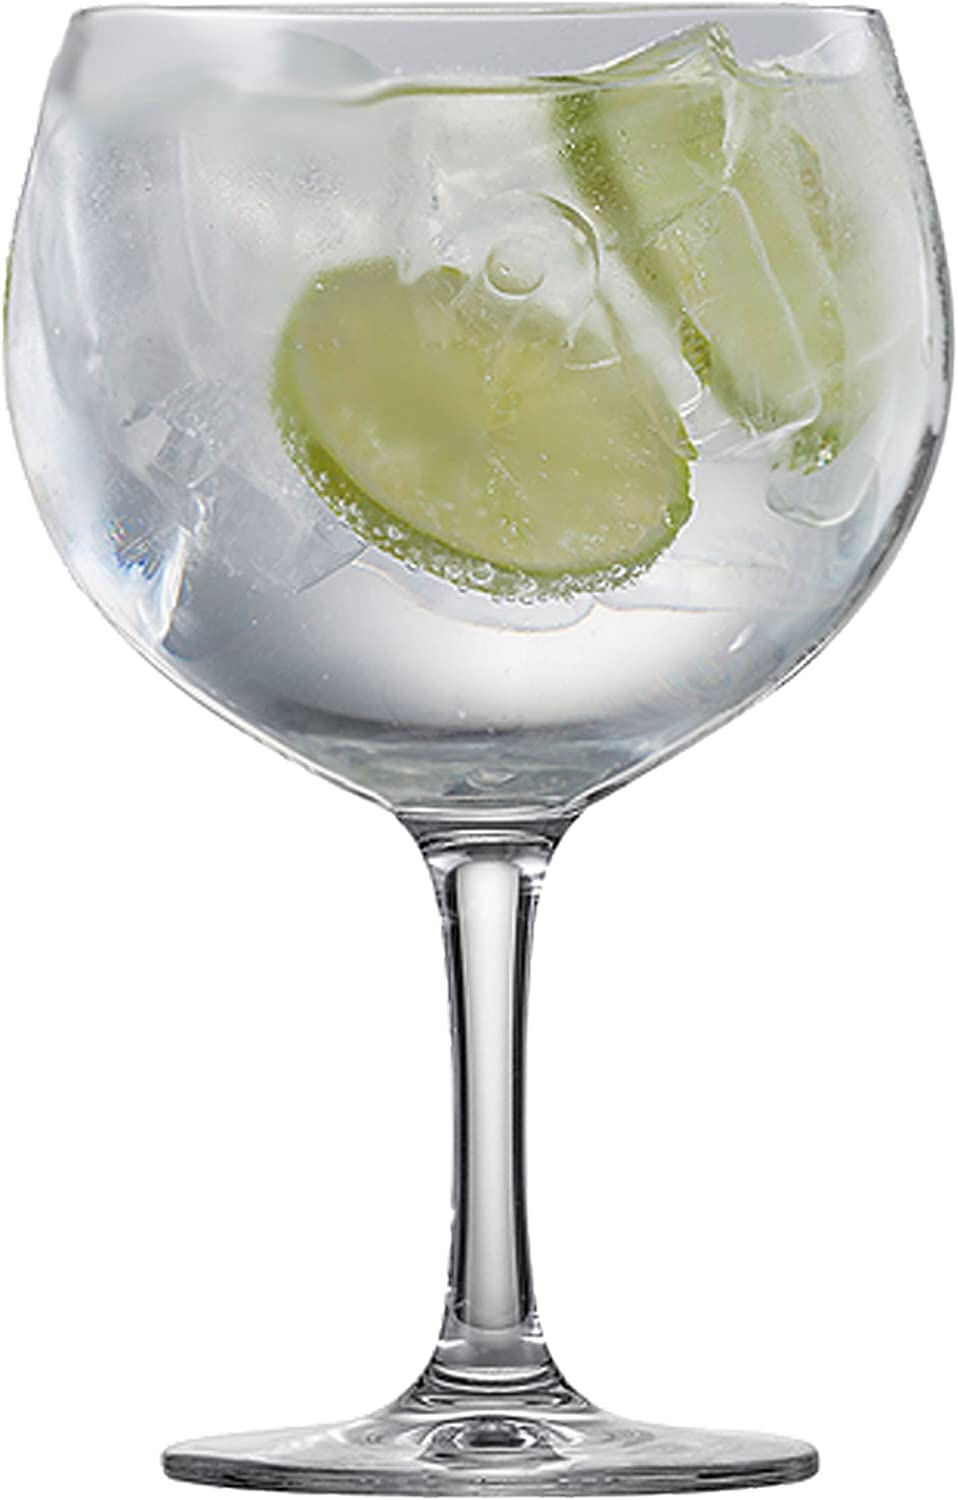 Bar Specials Spanish Gin & Tonic Glasses 23.5oz/696ml Balloon Glasses – Set of 2 – Gin by Schott Zwiesel